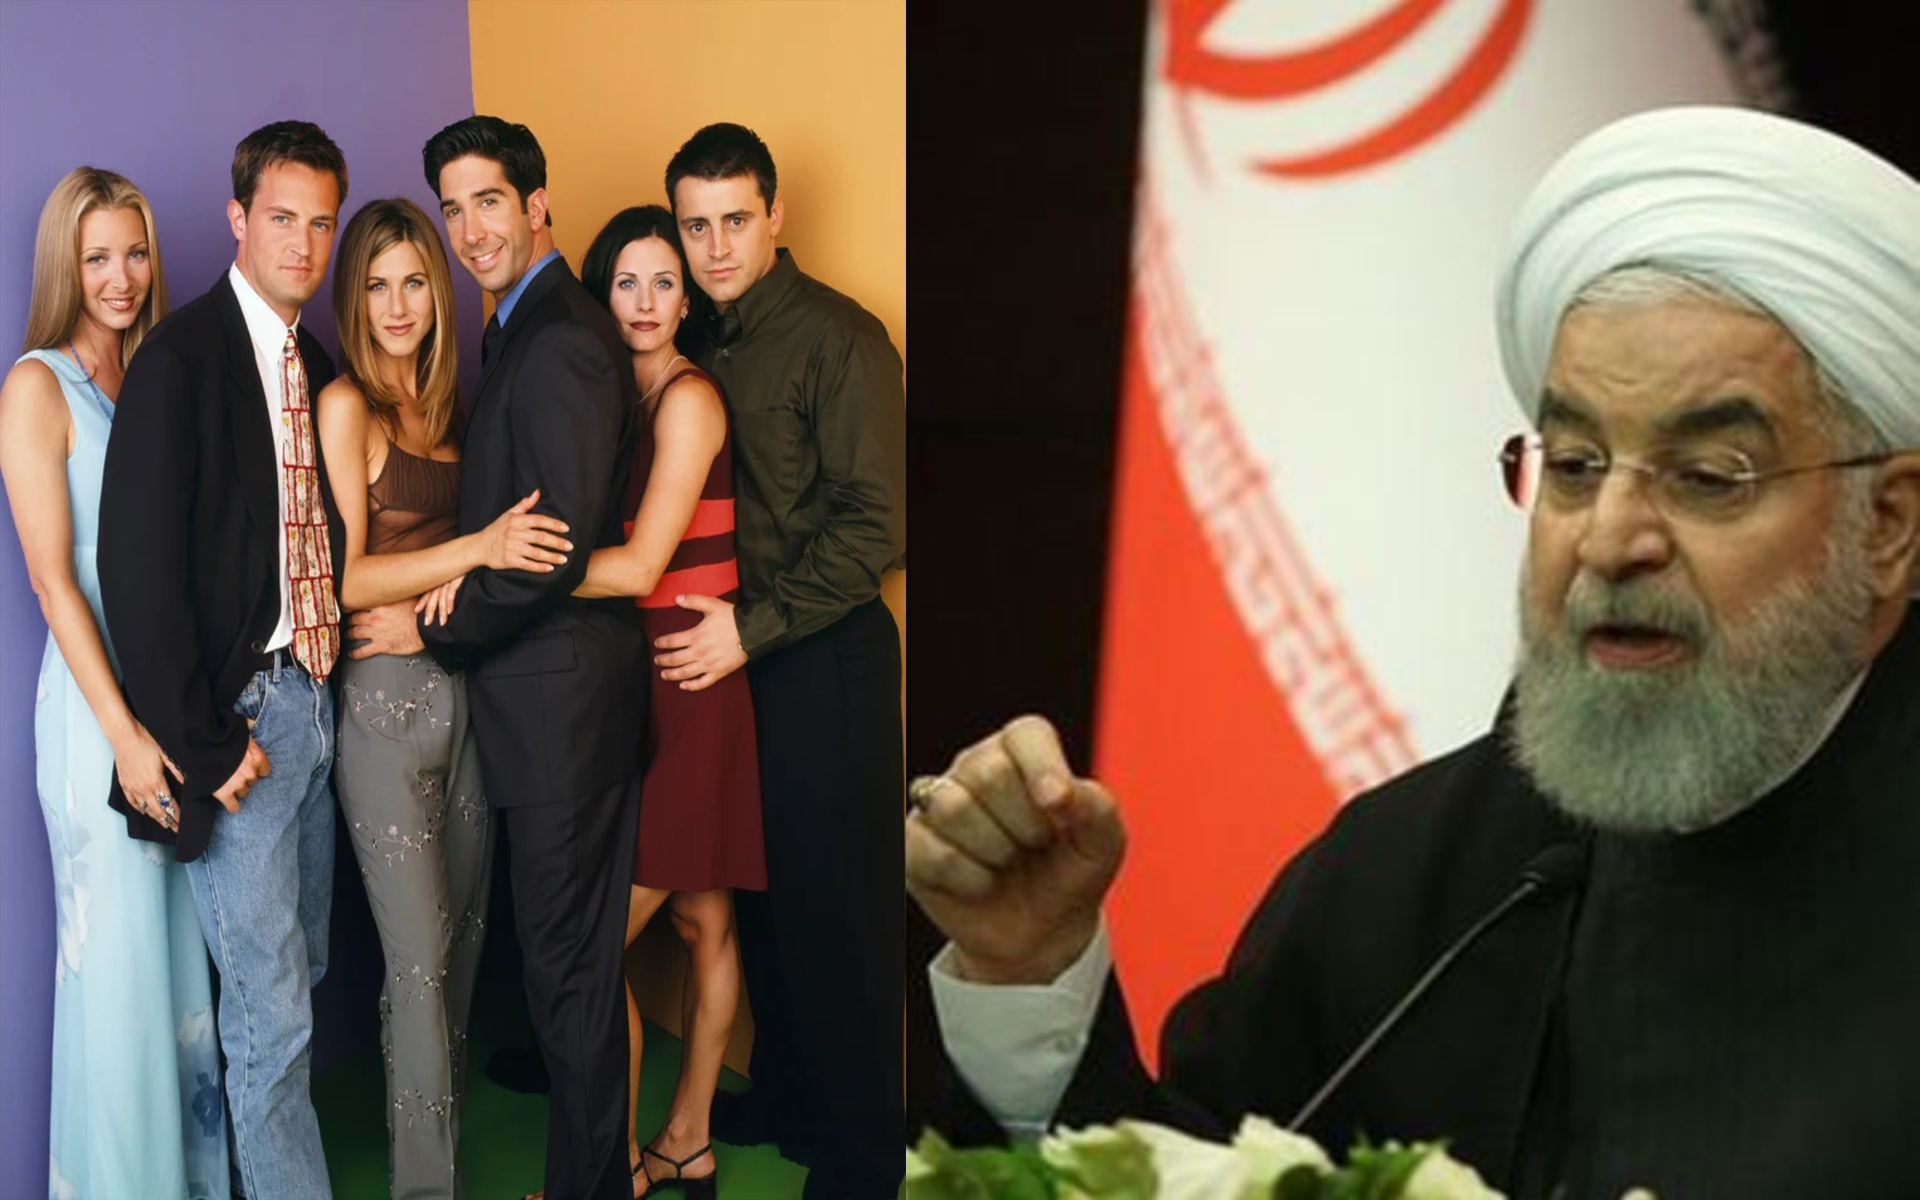 BREAKING: Iran Vows To Retaliate Against US By Adding Friends Back To Netflix